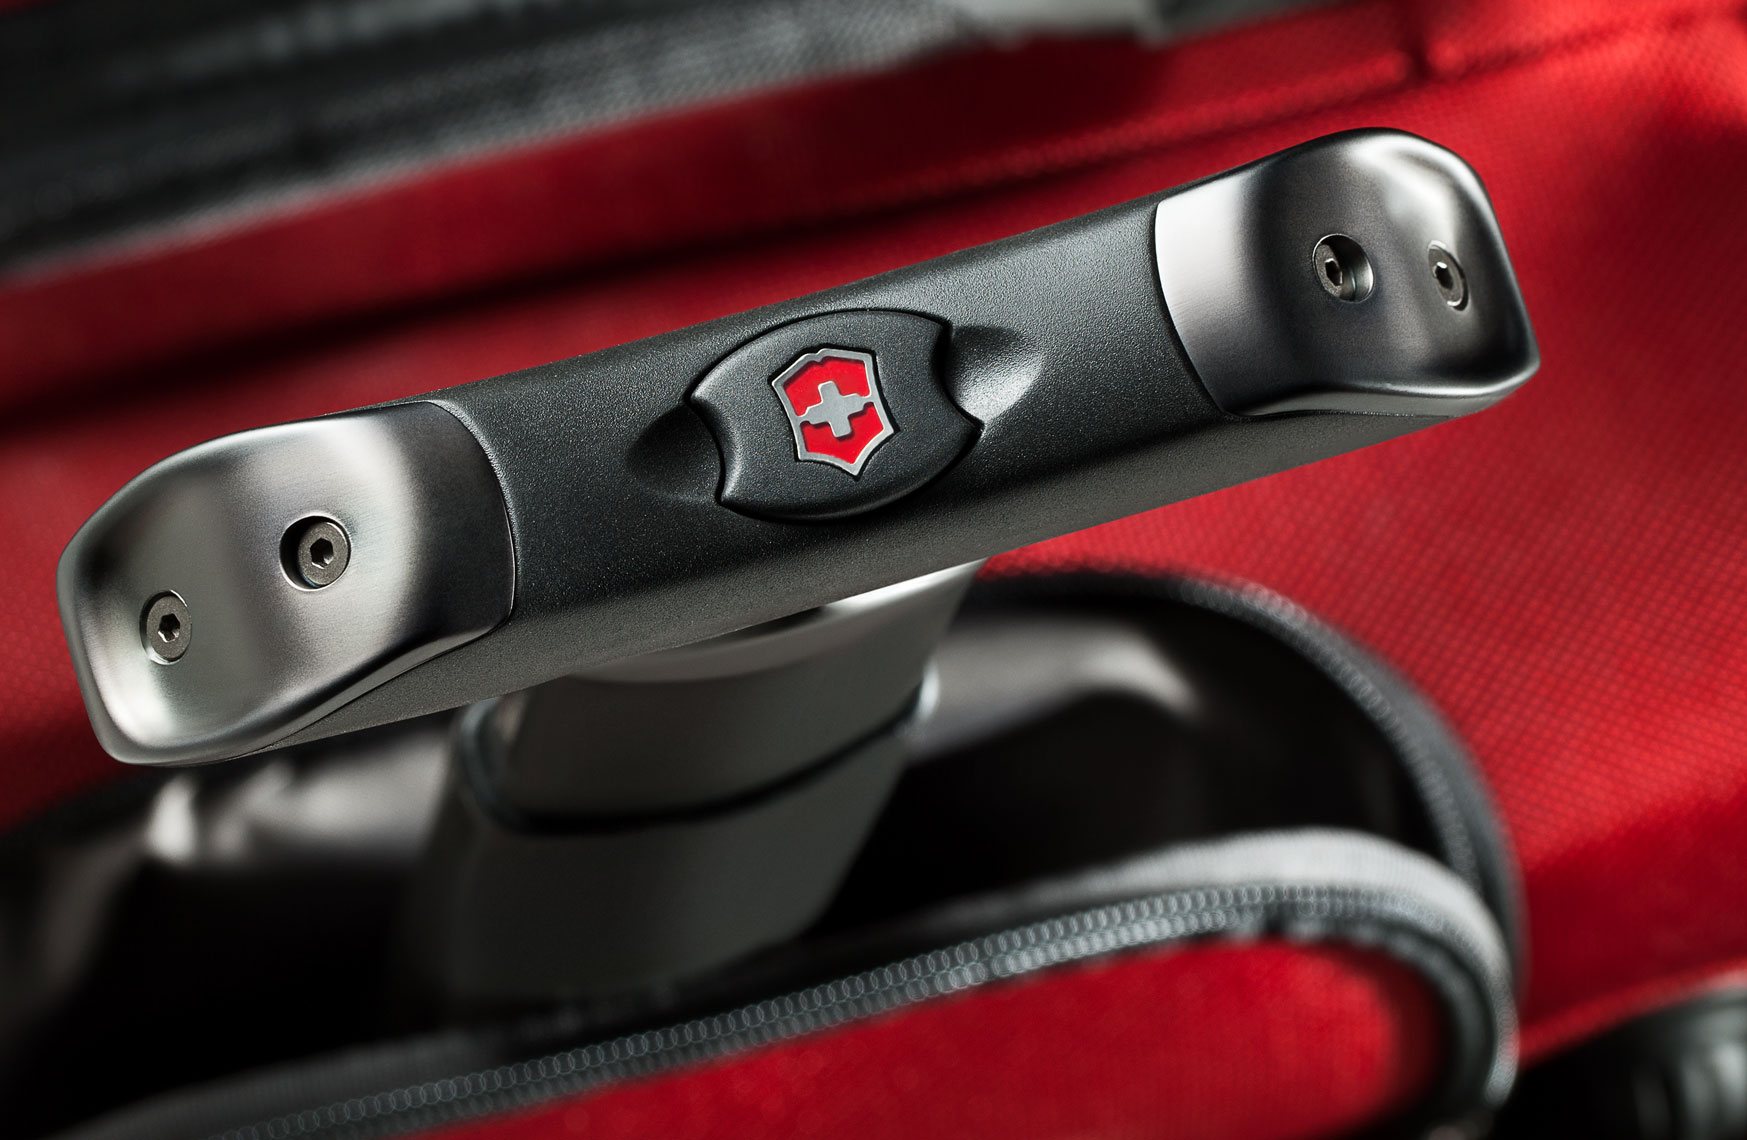 Product Photography Gear Victoronix Luggage Travel Beauty Detail Handle Red Metal Chicago